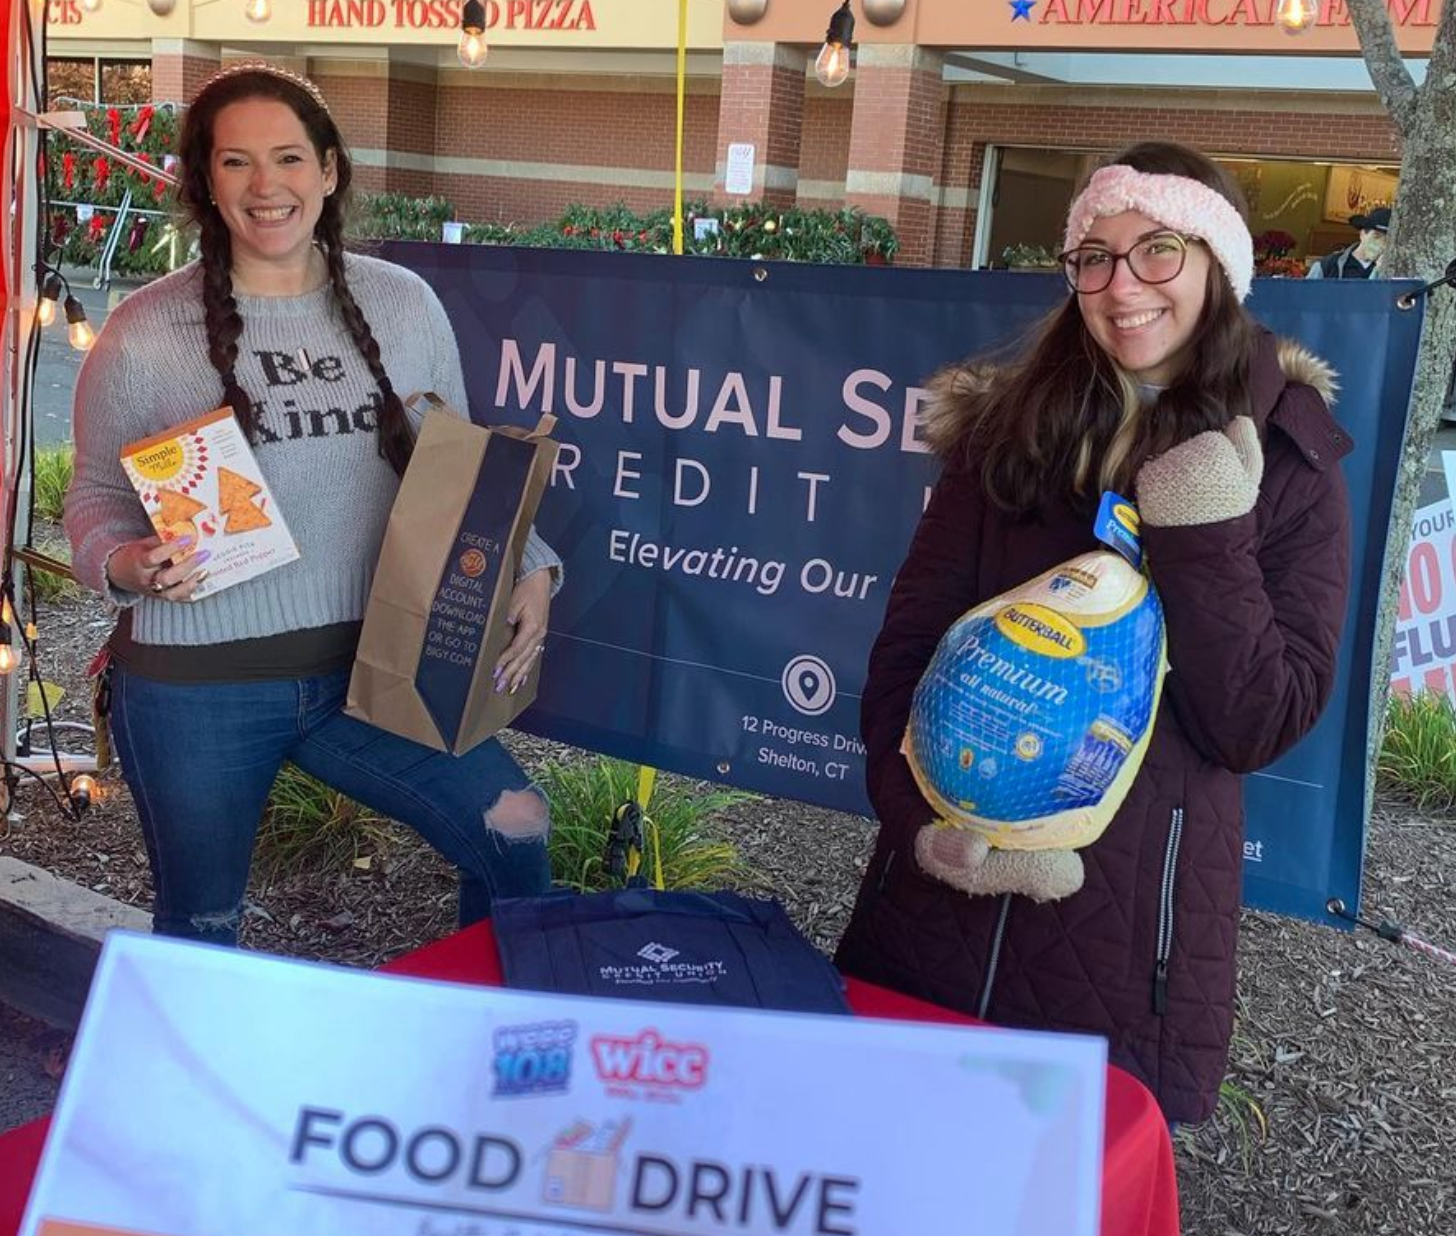 WATCH: WICC Food Drive